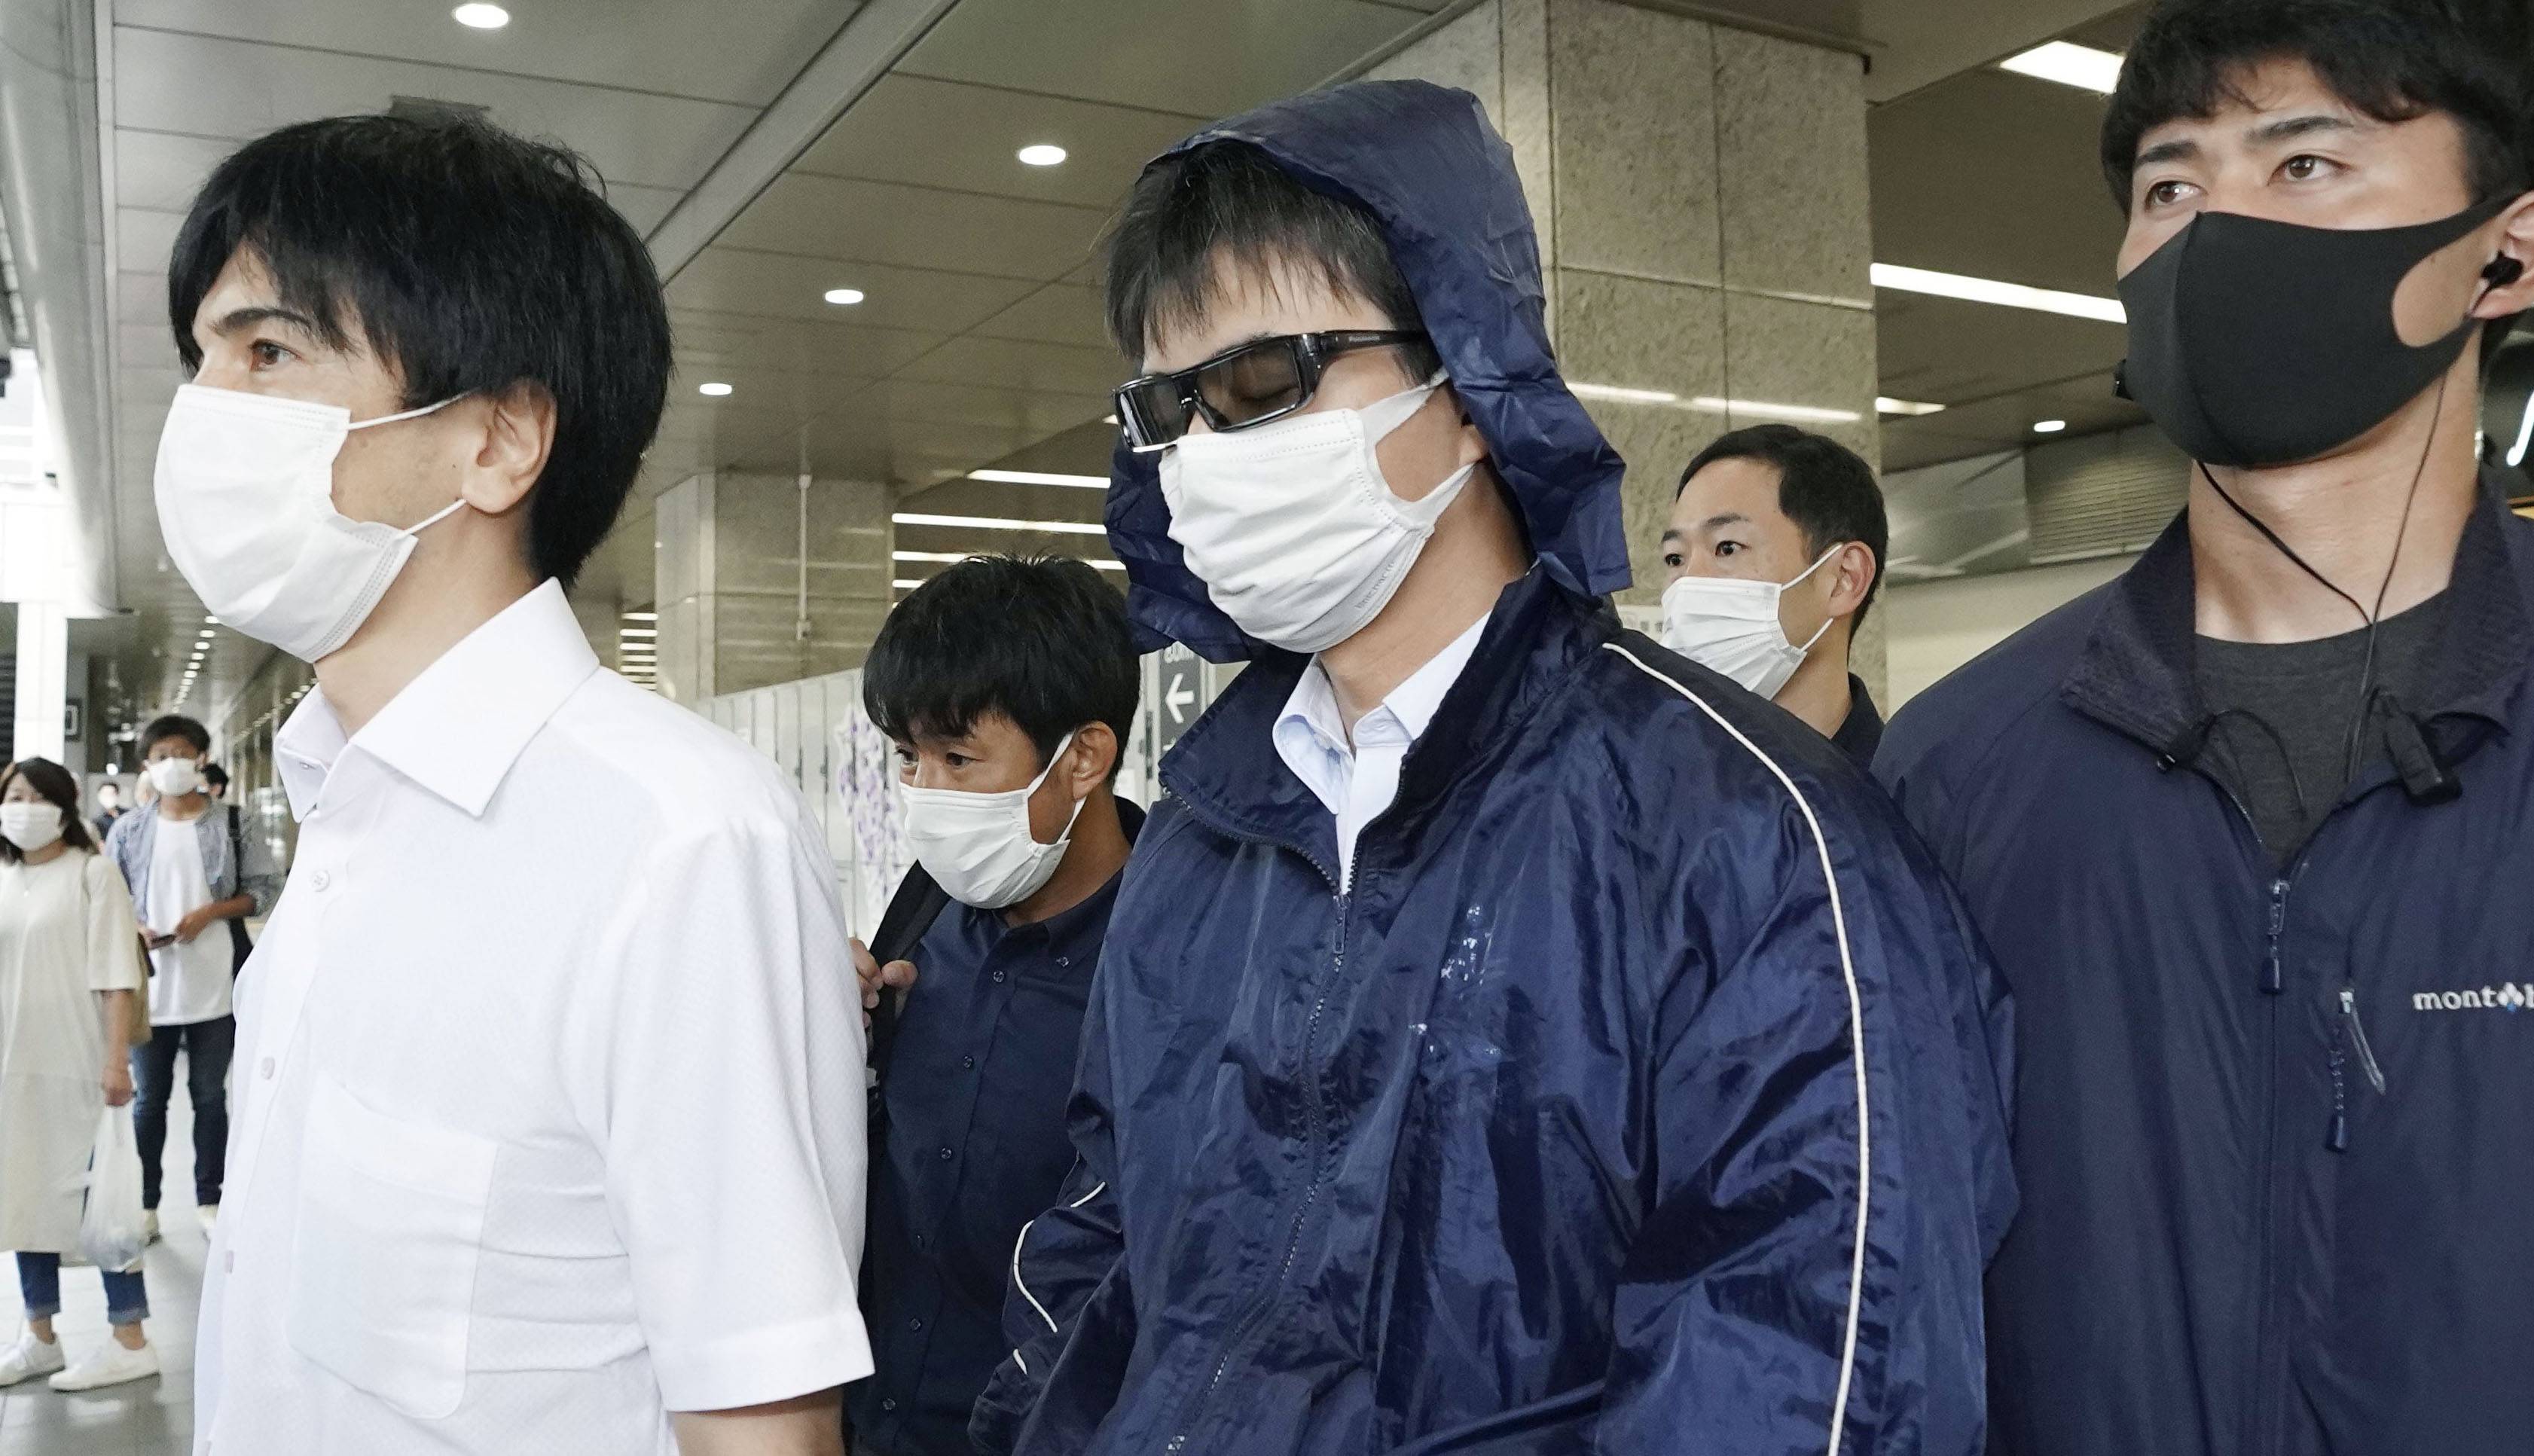 Naoki Yamamoto (center), a doctor in Tokyo who was arrested on suspicion of helping a woman die, arrives at Kyoto Station on Thursday. | KYODO